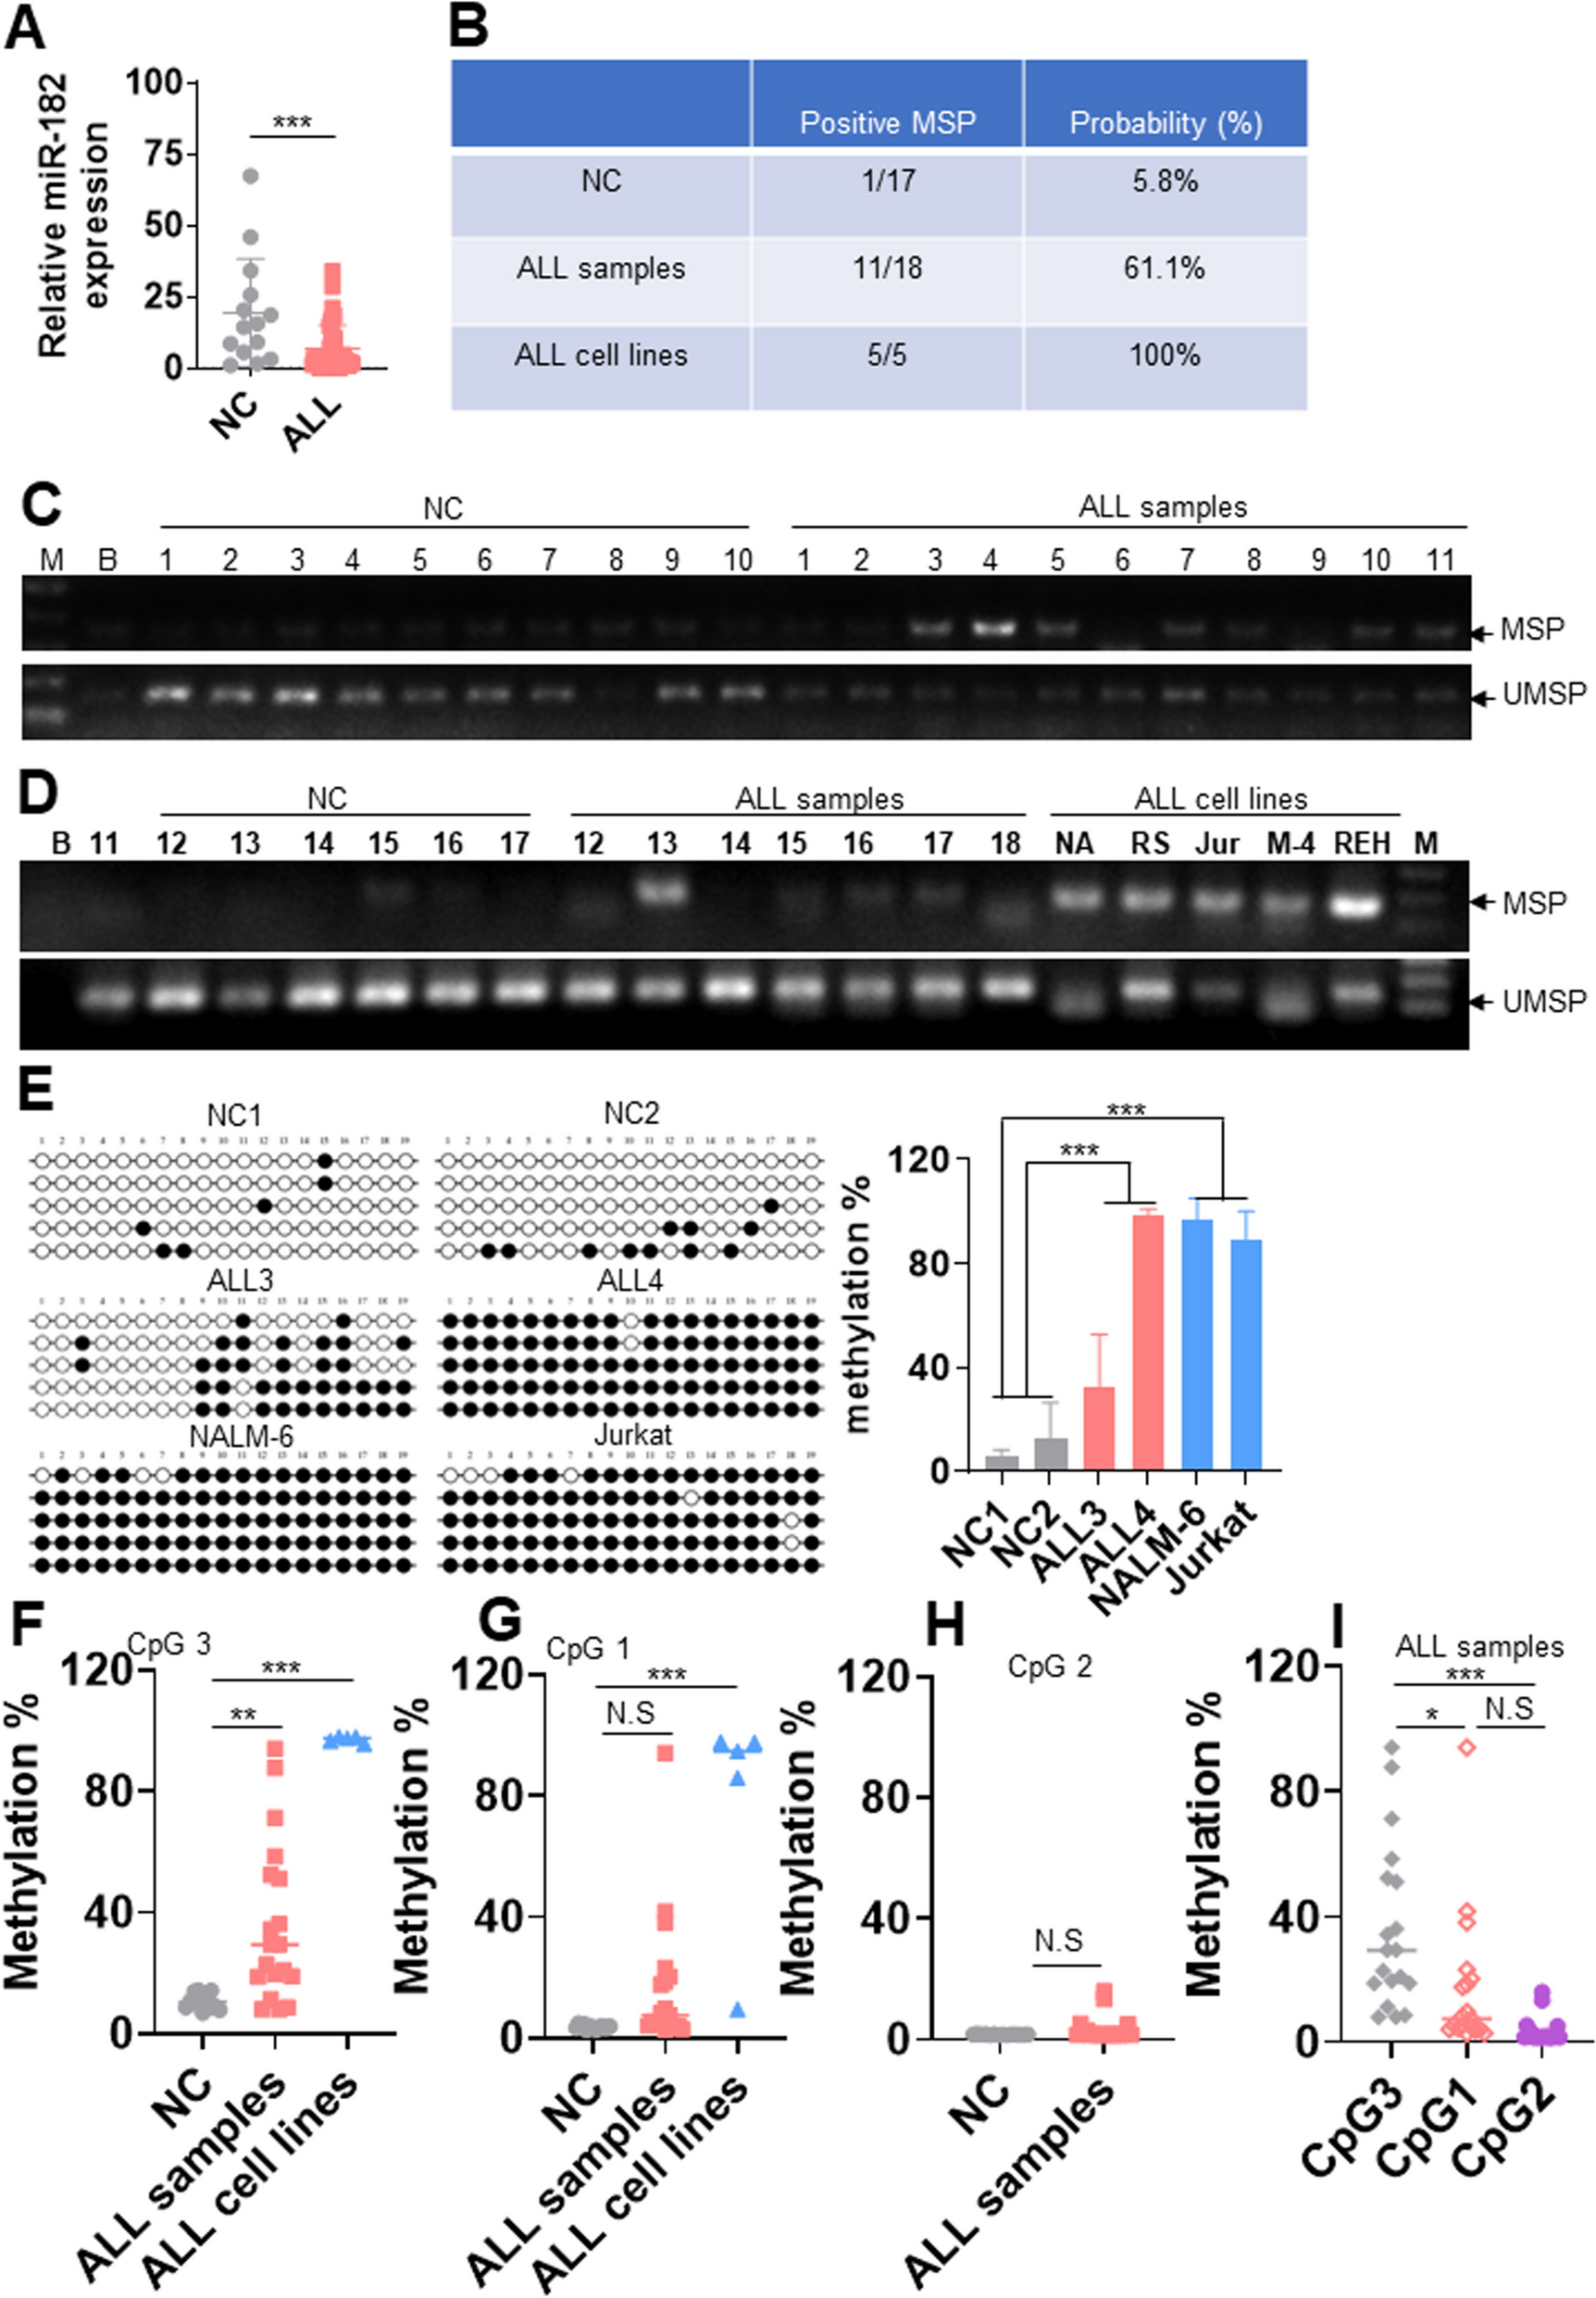 Low expression of miR-182 caused by DNA hypermethylation accelerates acute lymphocyte leukemia development by targeting PBX3 and BCL2: miR-182 promoter methylation is a predictive marker for hypomethylation agents + BCL2 inhibitor venetoclax